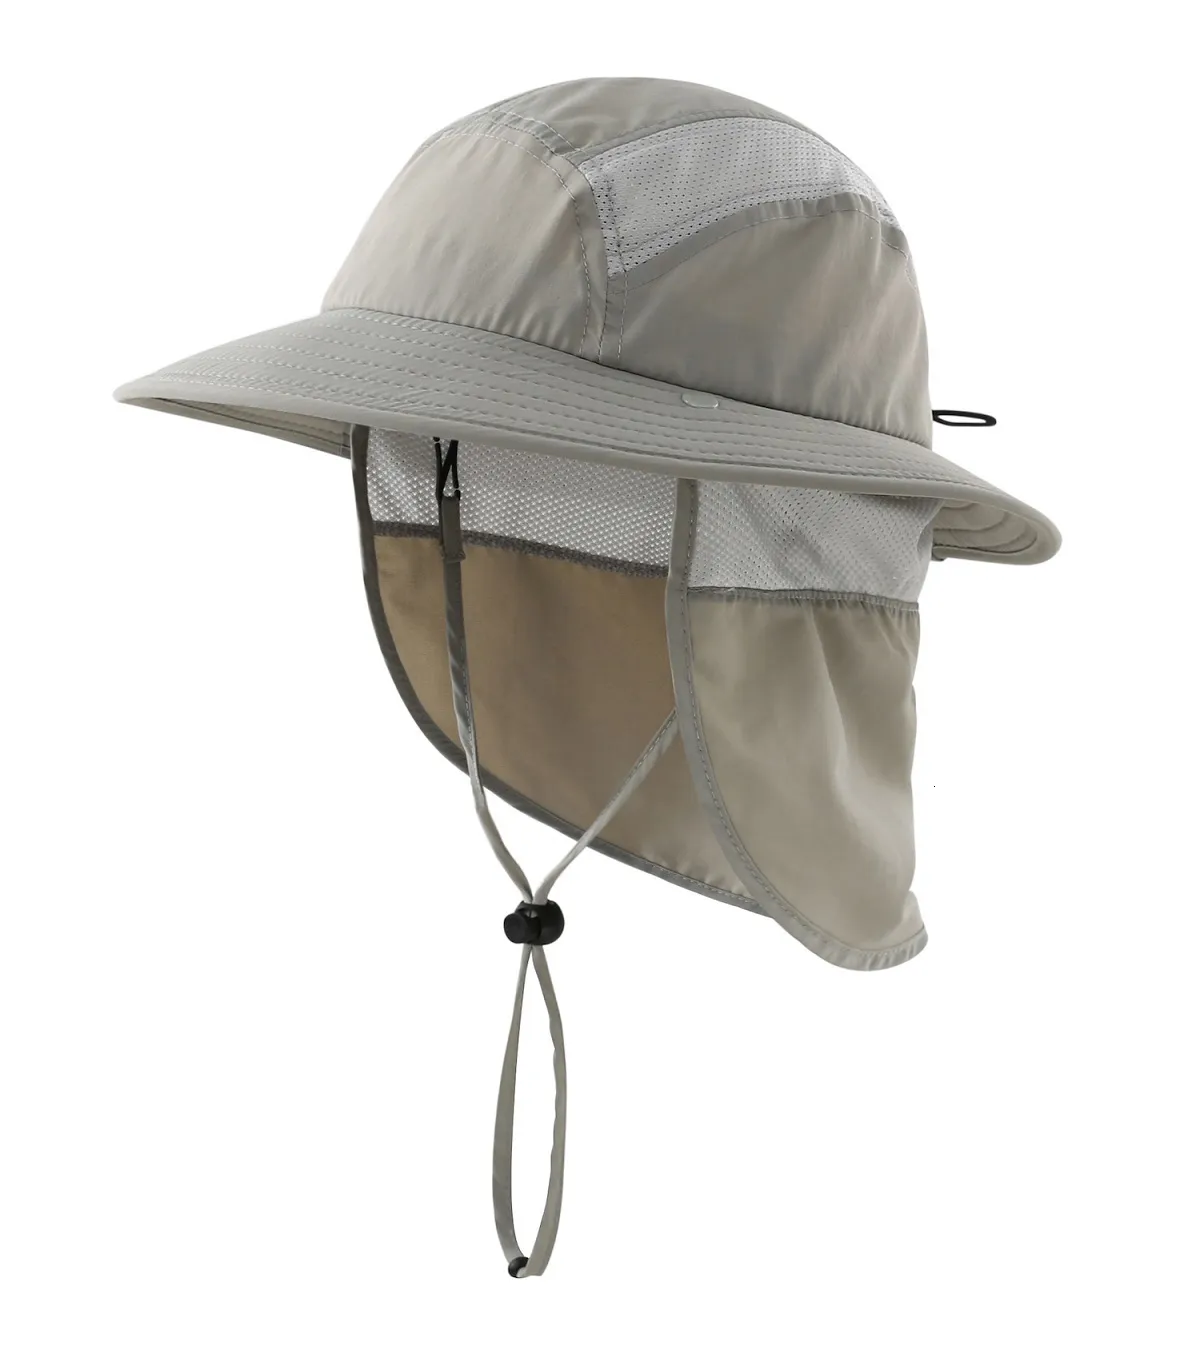 UPF50 Wide Brim Khaki Boonie Hat With Detachable Neck Flap For Toddler Boys  And Girls Perfect For Summer Sun, Beach, Safari Play And Kids Activities  230904 From Fan03, $16.54